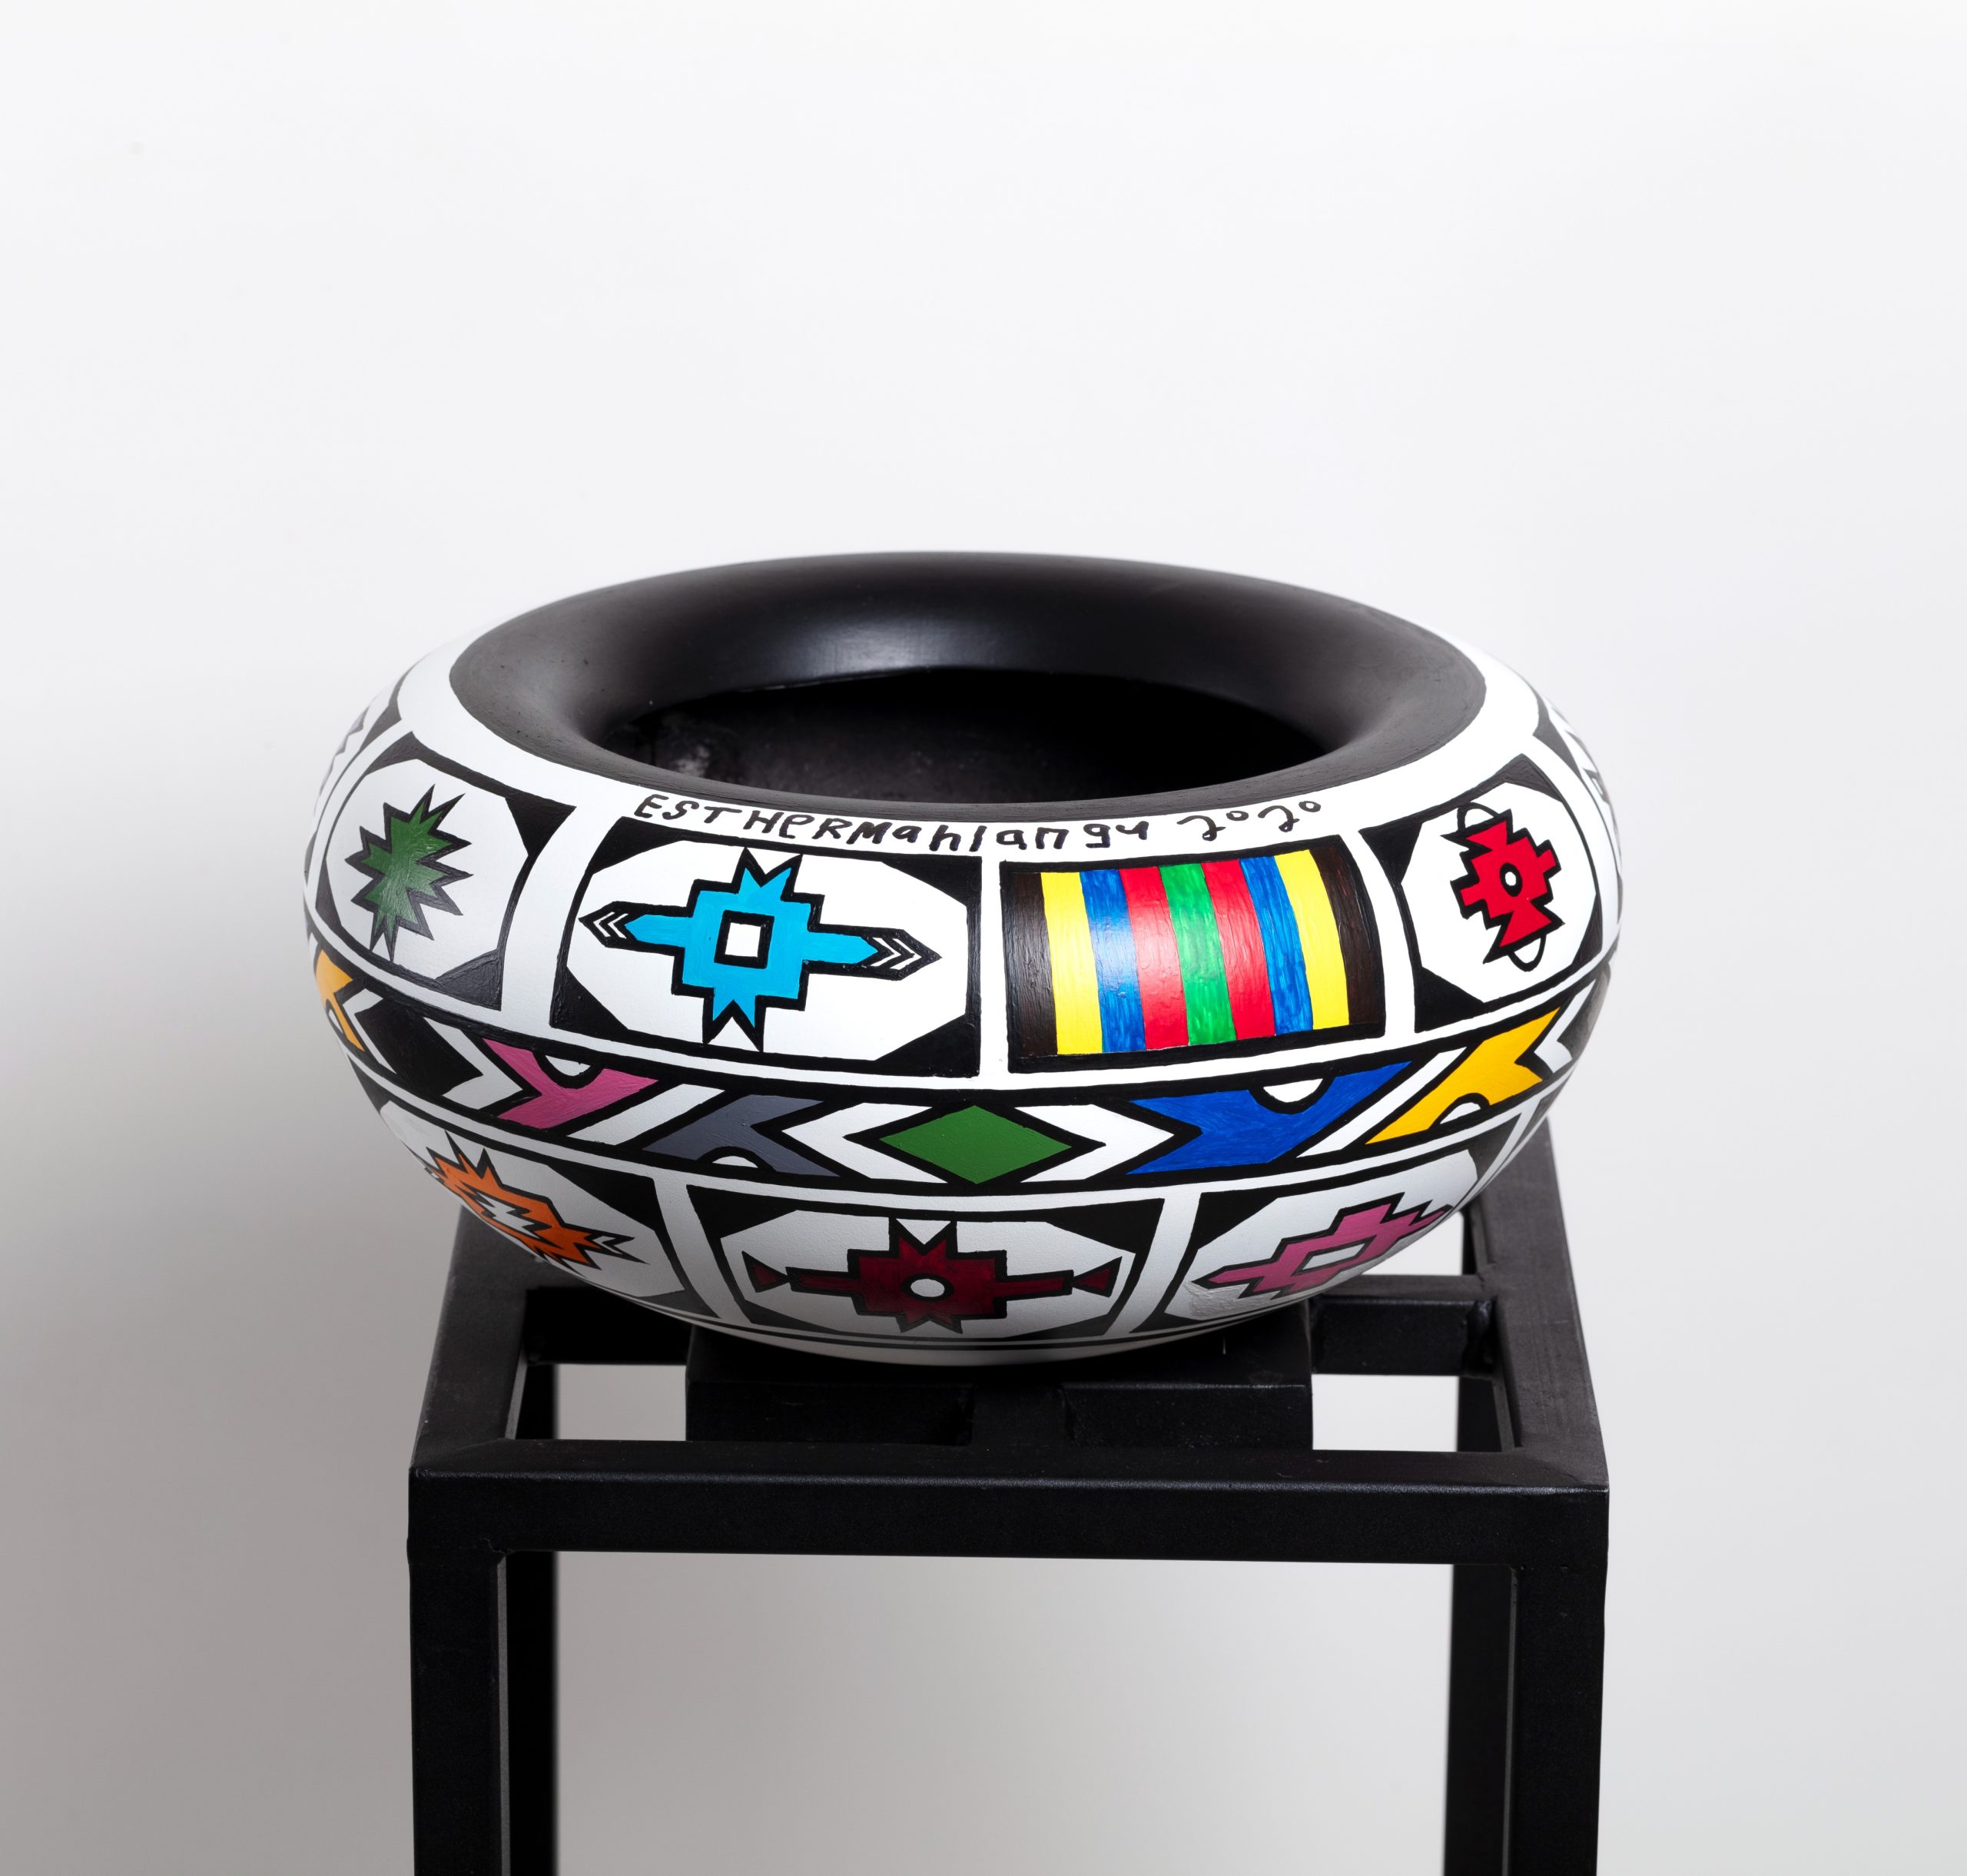 Then I Knew I Was Good at Painting: Esther Mahlangu, A Retrospective - ( Vessel 2021 | Acrylic on GRP | 20 x 40 cm)